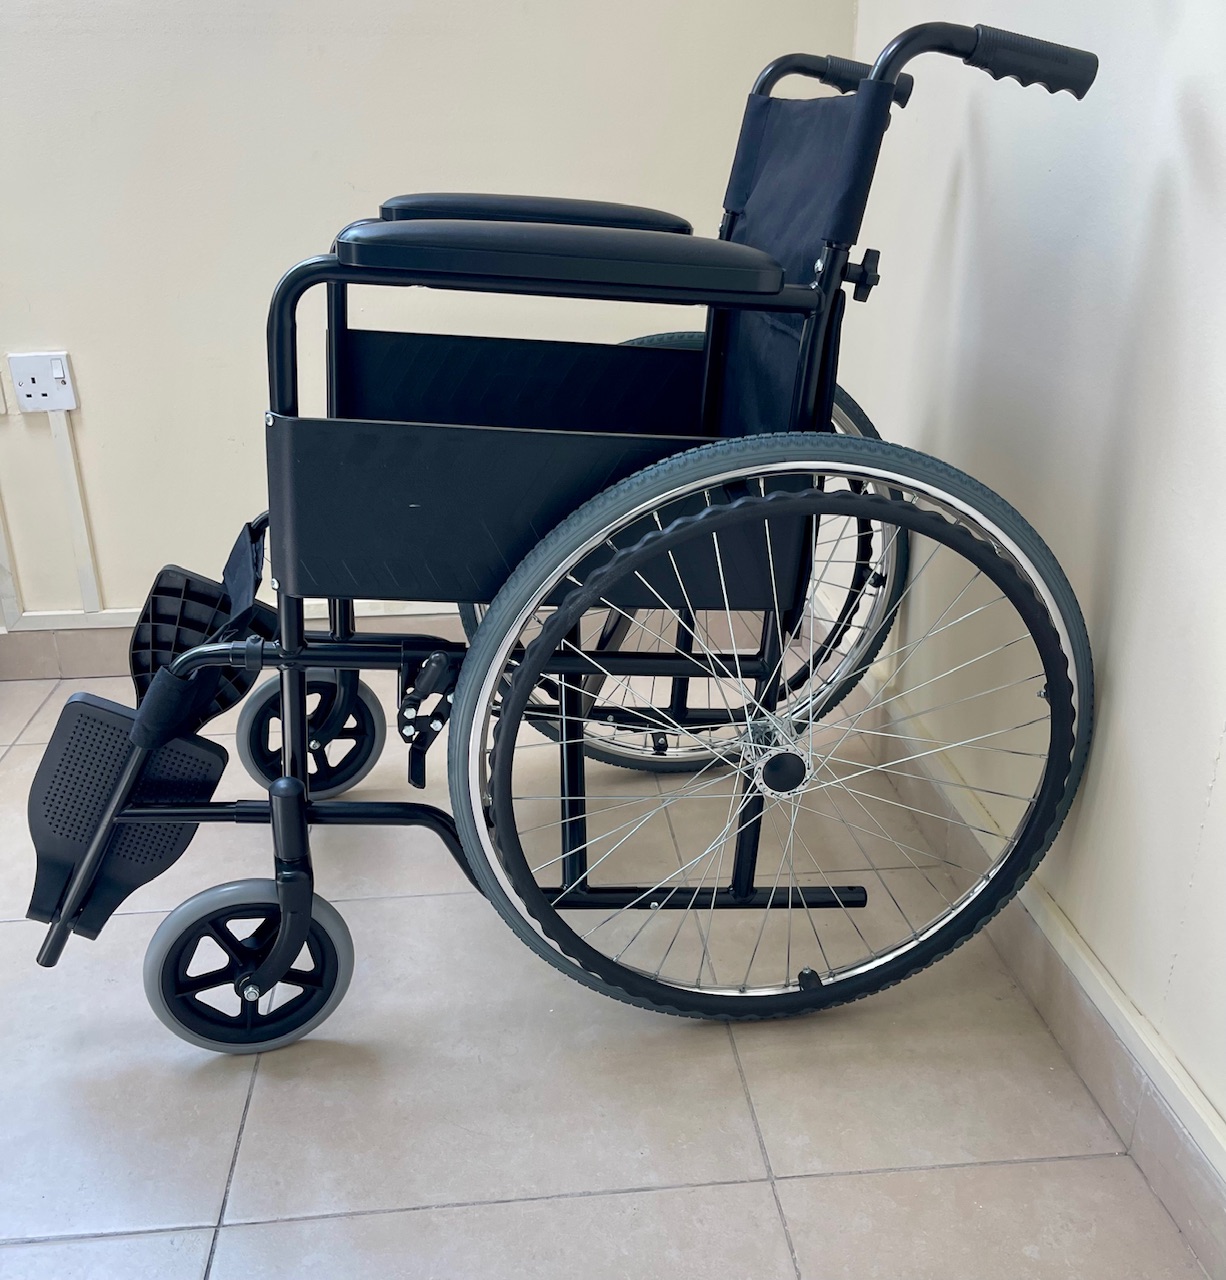 Wheelchair for Sale Used Only Few Times